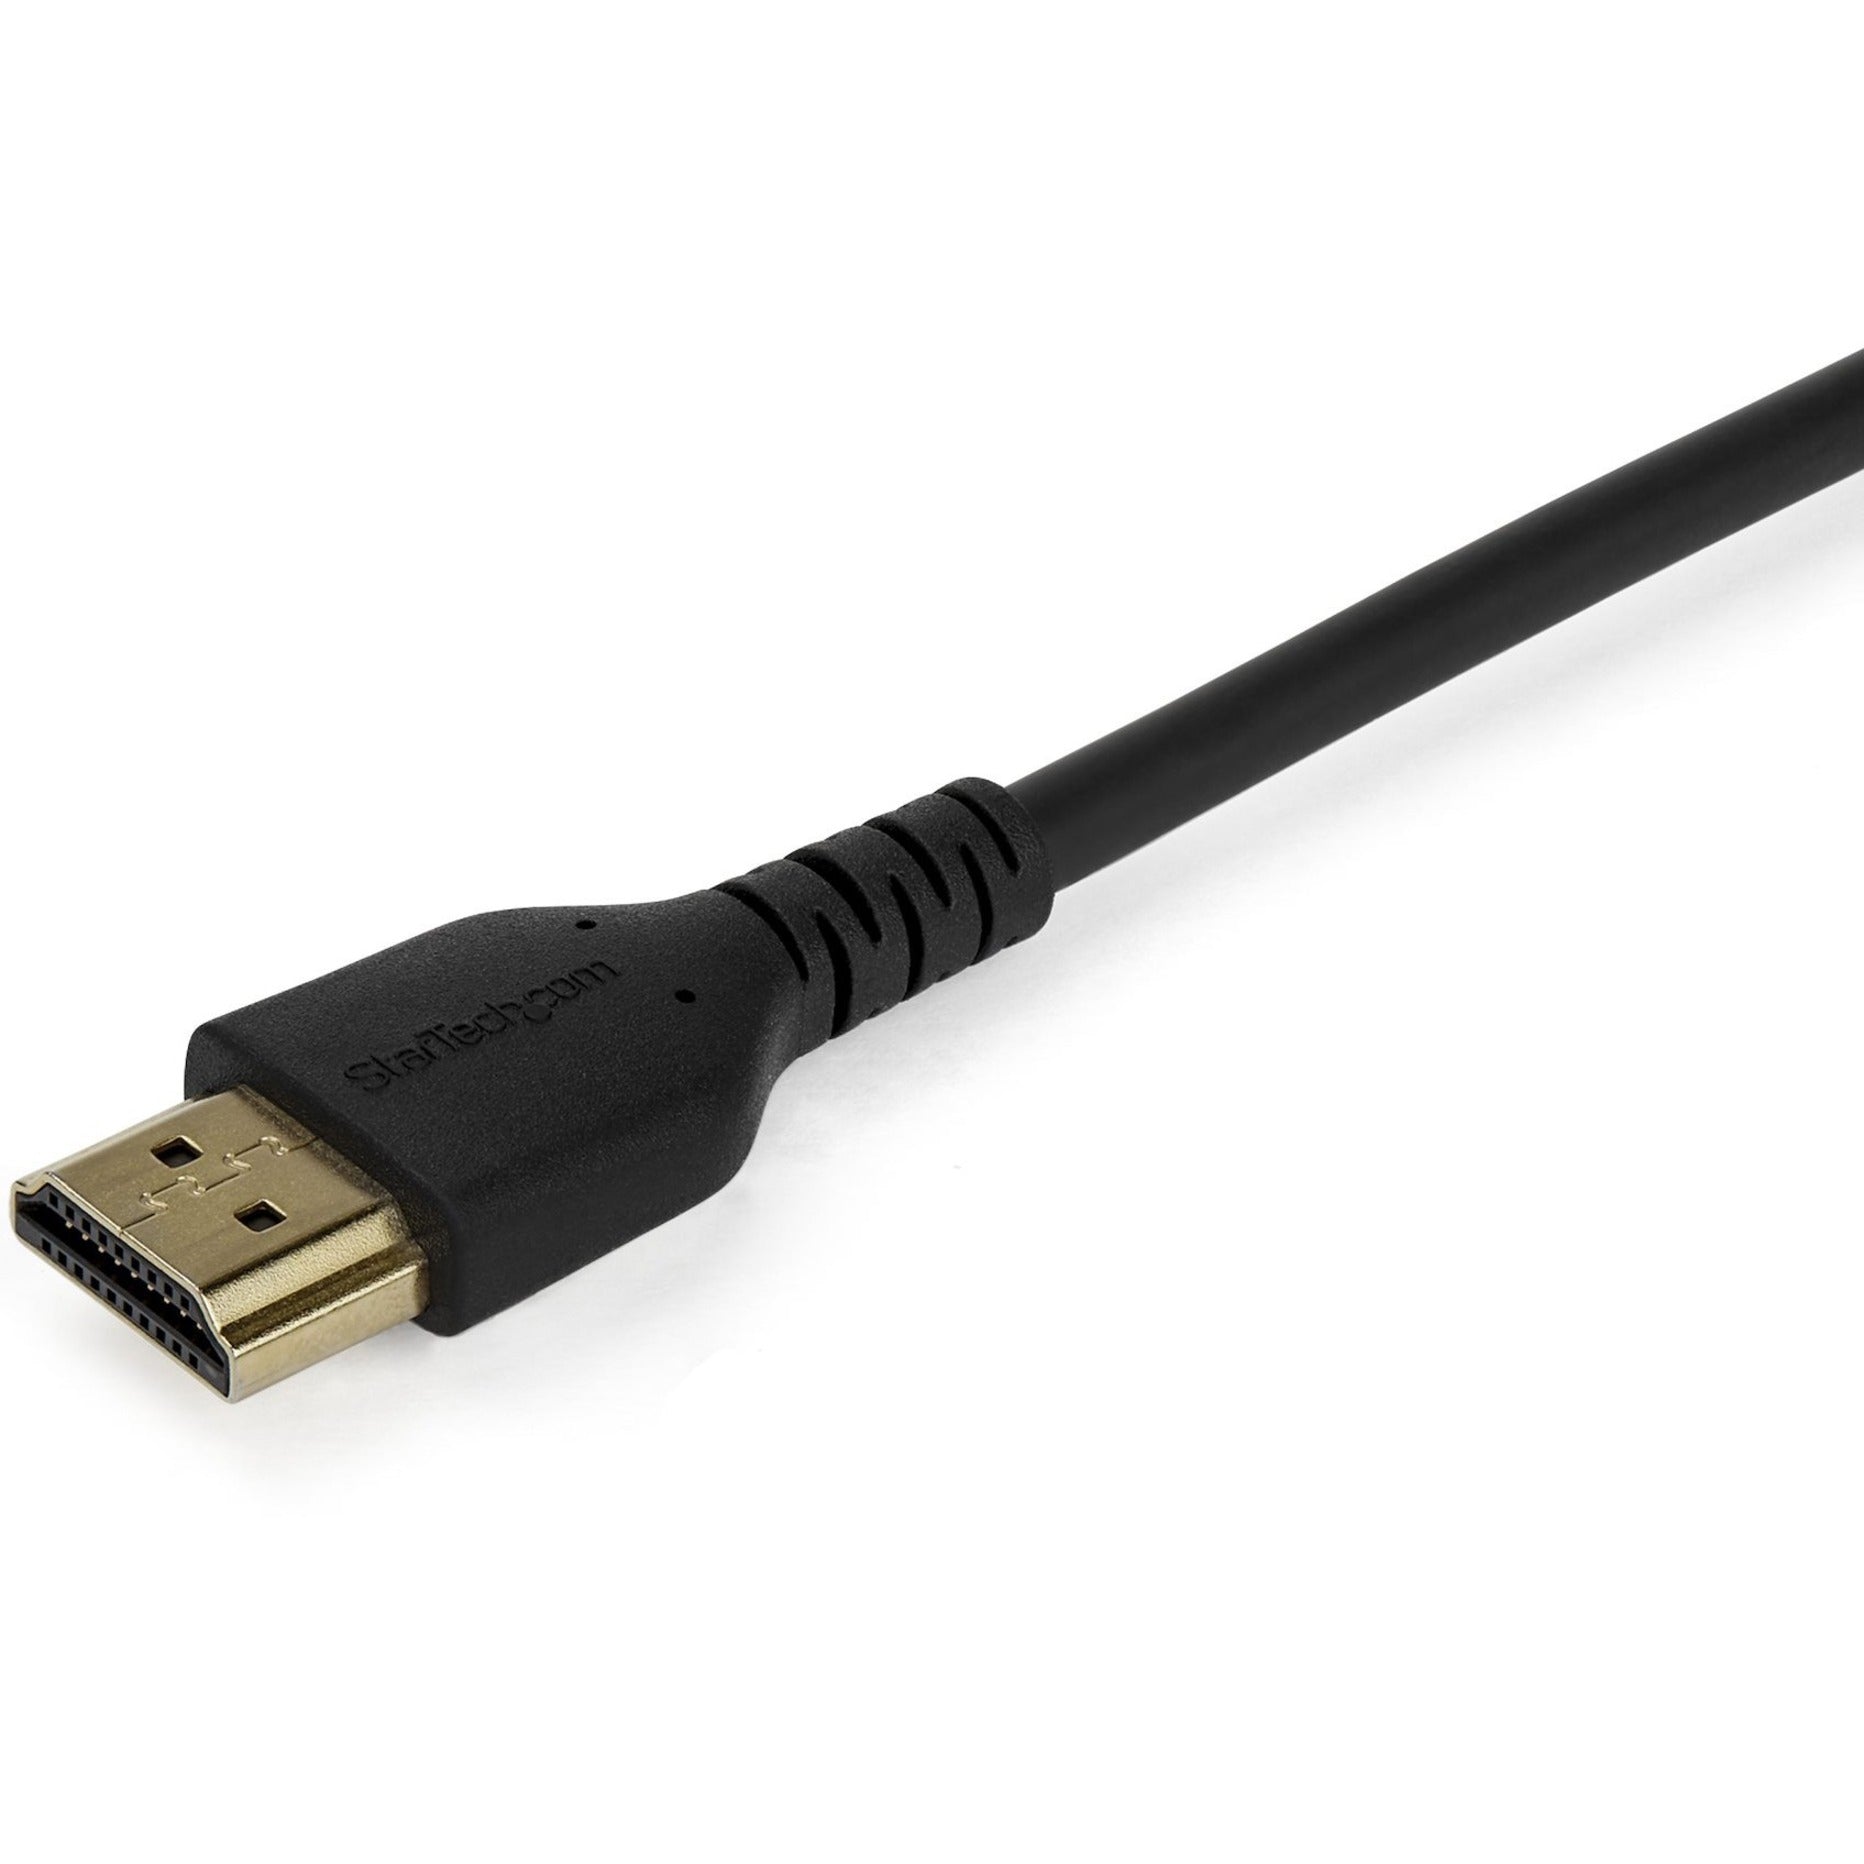 Premium High Speed HDMI Cable with Ethernet - 4K 60Hz (RHDMM2MP)